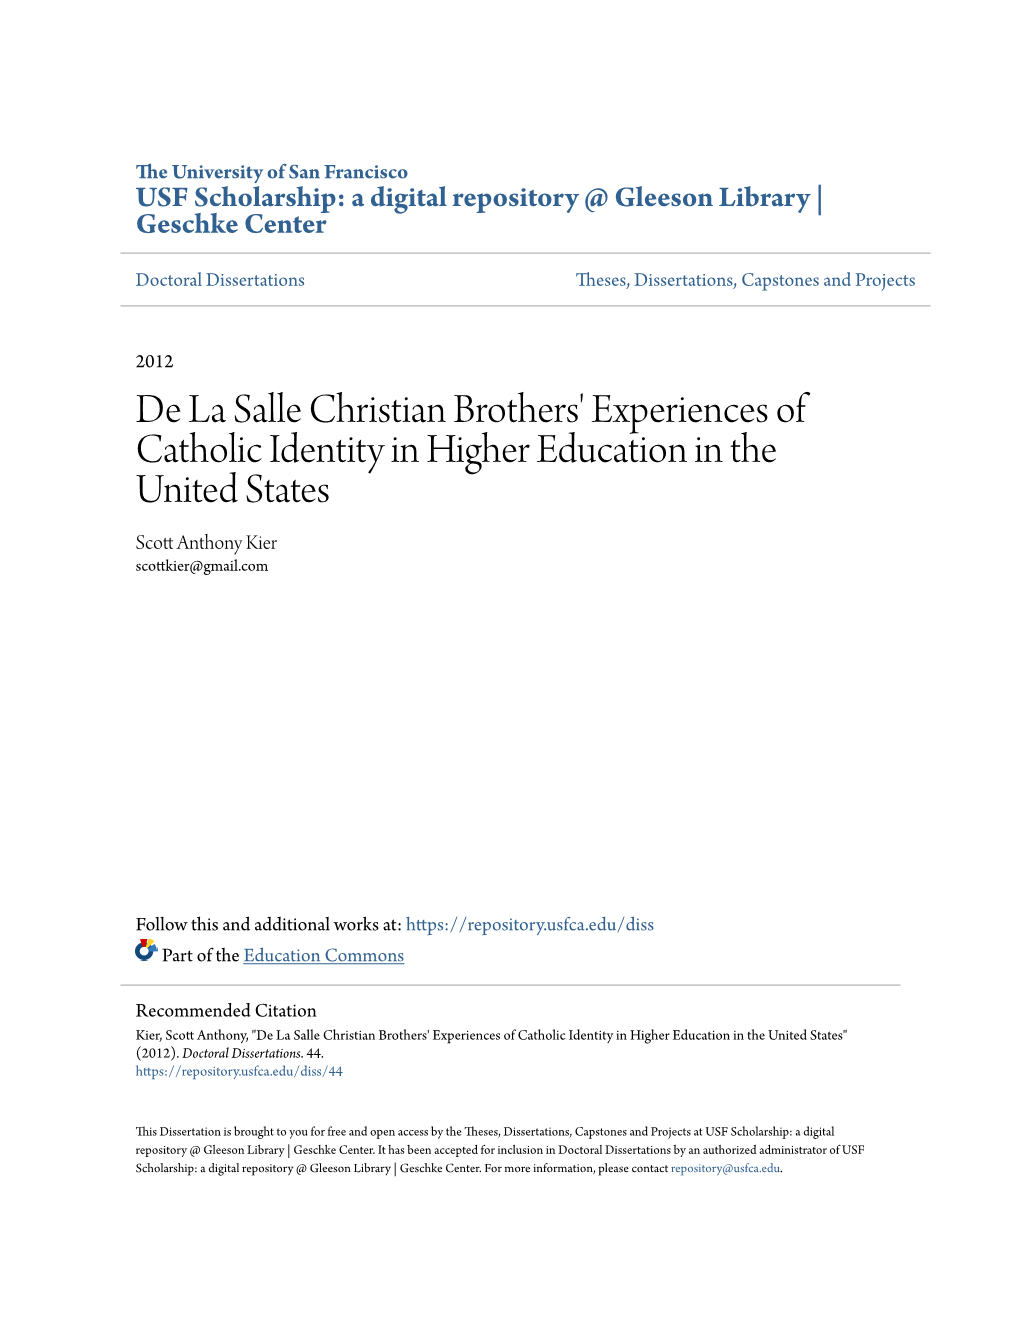 De La Salle Christian Brothers' Experiences of Catholic Identity in Higher Education in the United States Scott Anthony Kier Scottkier@Gmail.Com